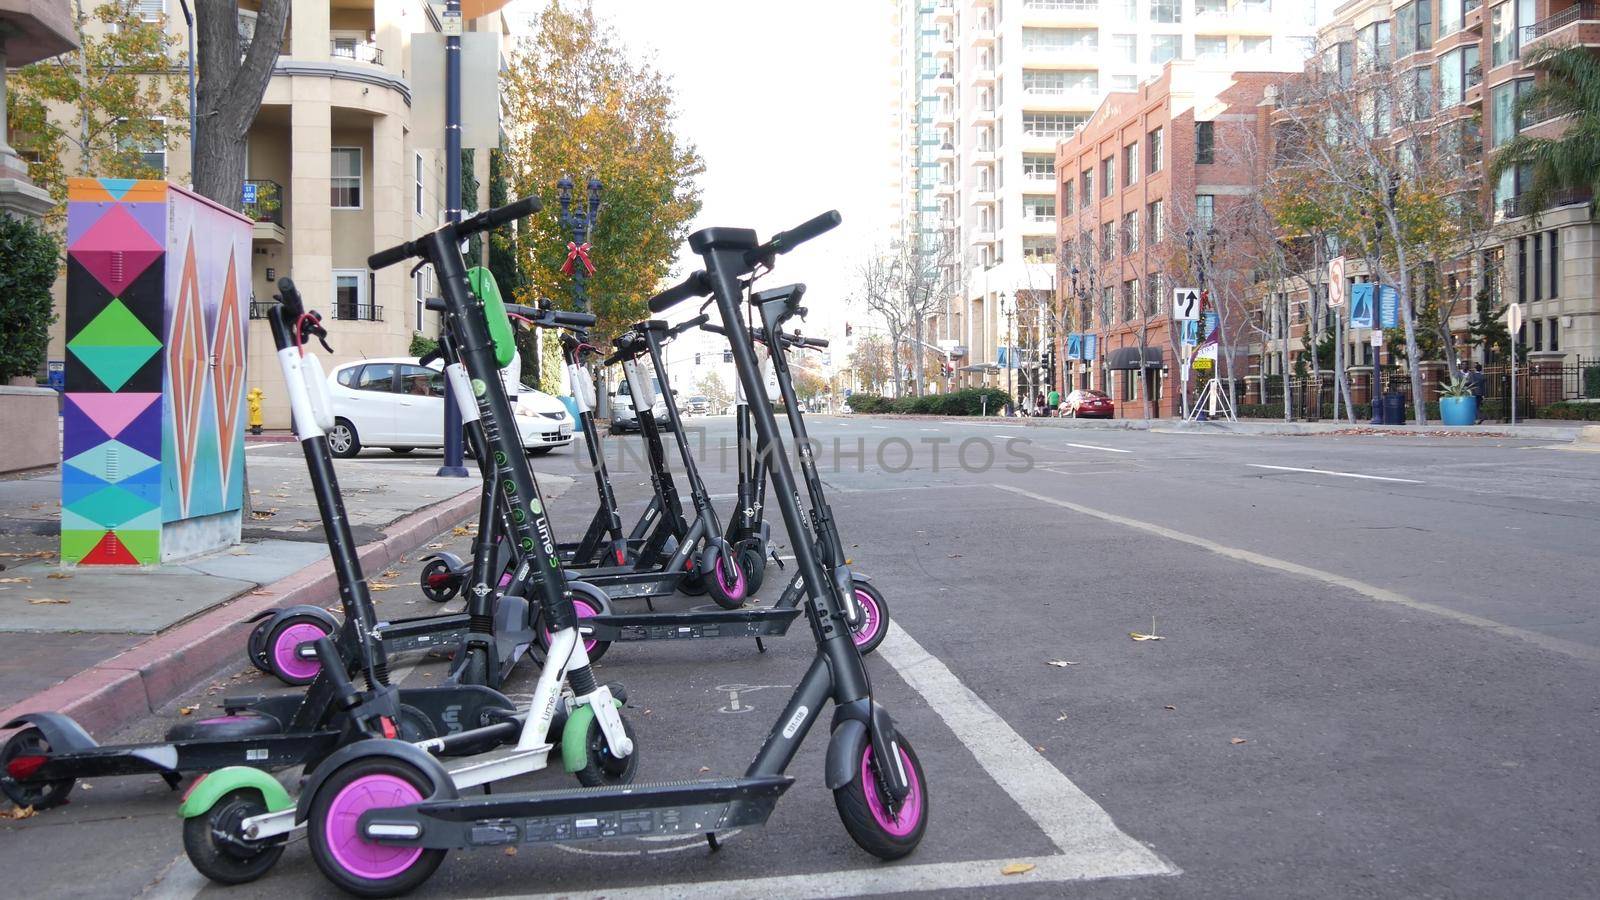 SAN DIEGO, CALIFORNIA USA - 4 JAN 2020: Row of ride sharing electric scooters parked on street in Gaslamp Quarter. Rental dockless public bikes, eco transport in city. Rent kick cycle with mobile app by DogoraSun